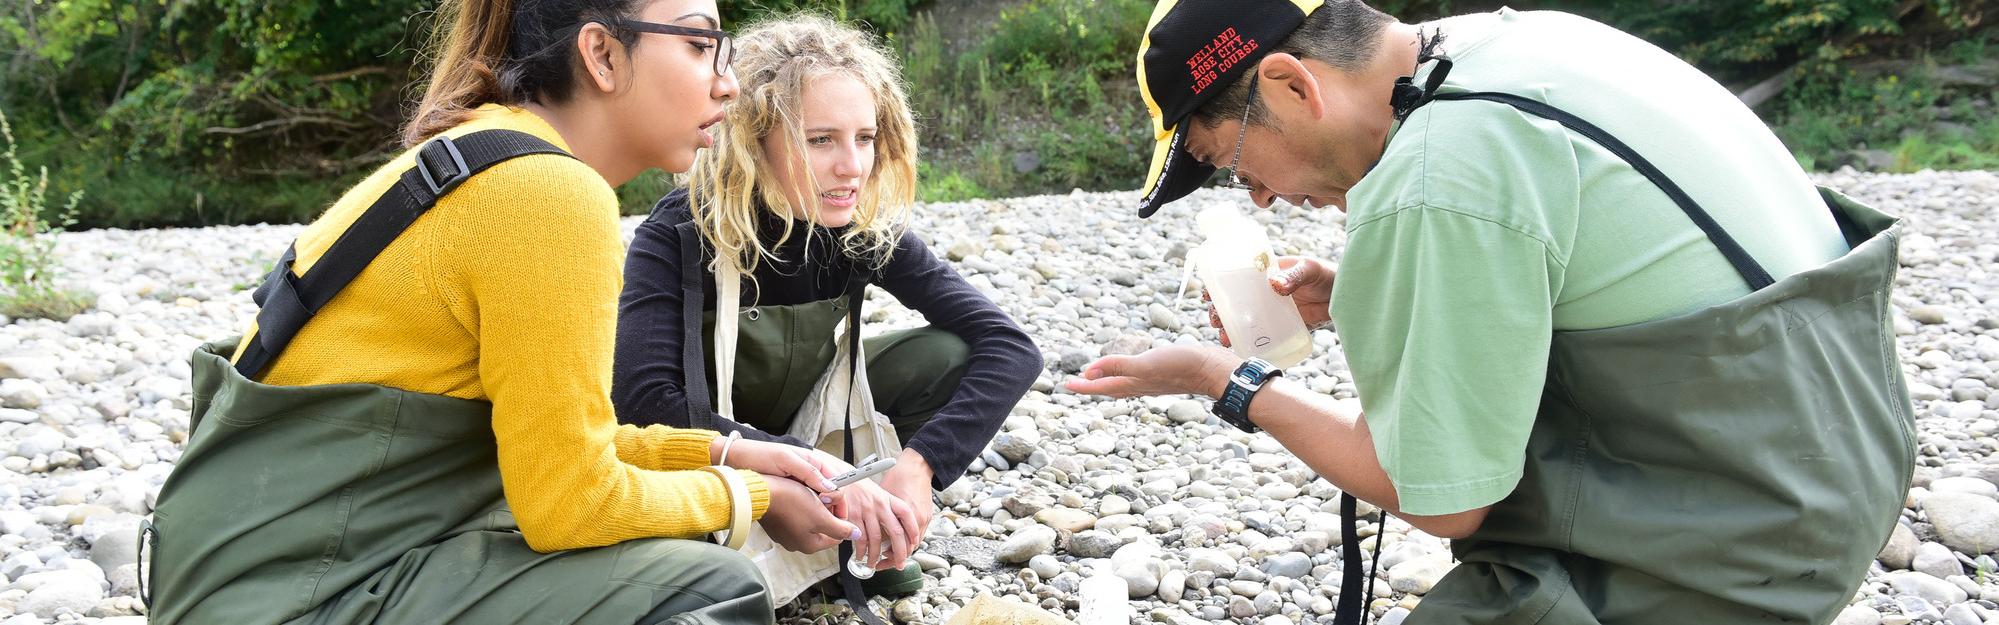 Students on field trip, on rocks by a creek, examining a sample